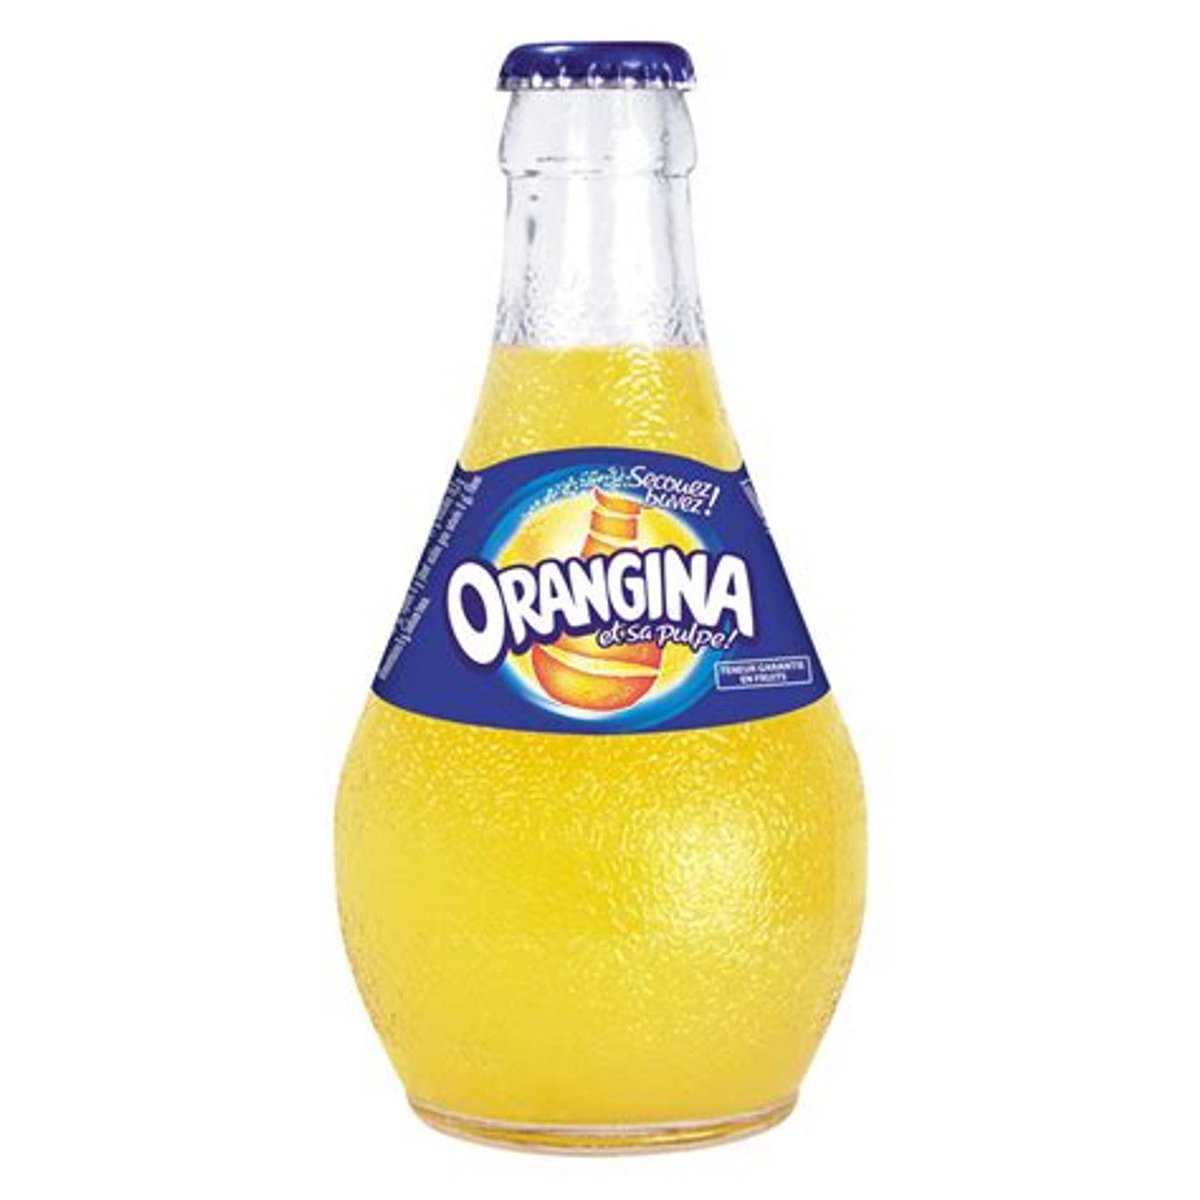 who else remembers this drink